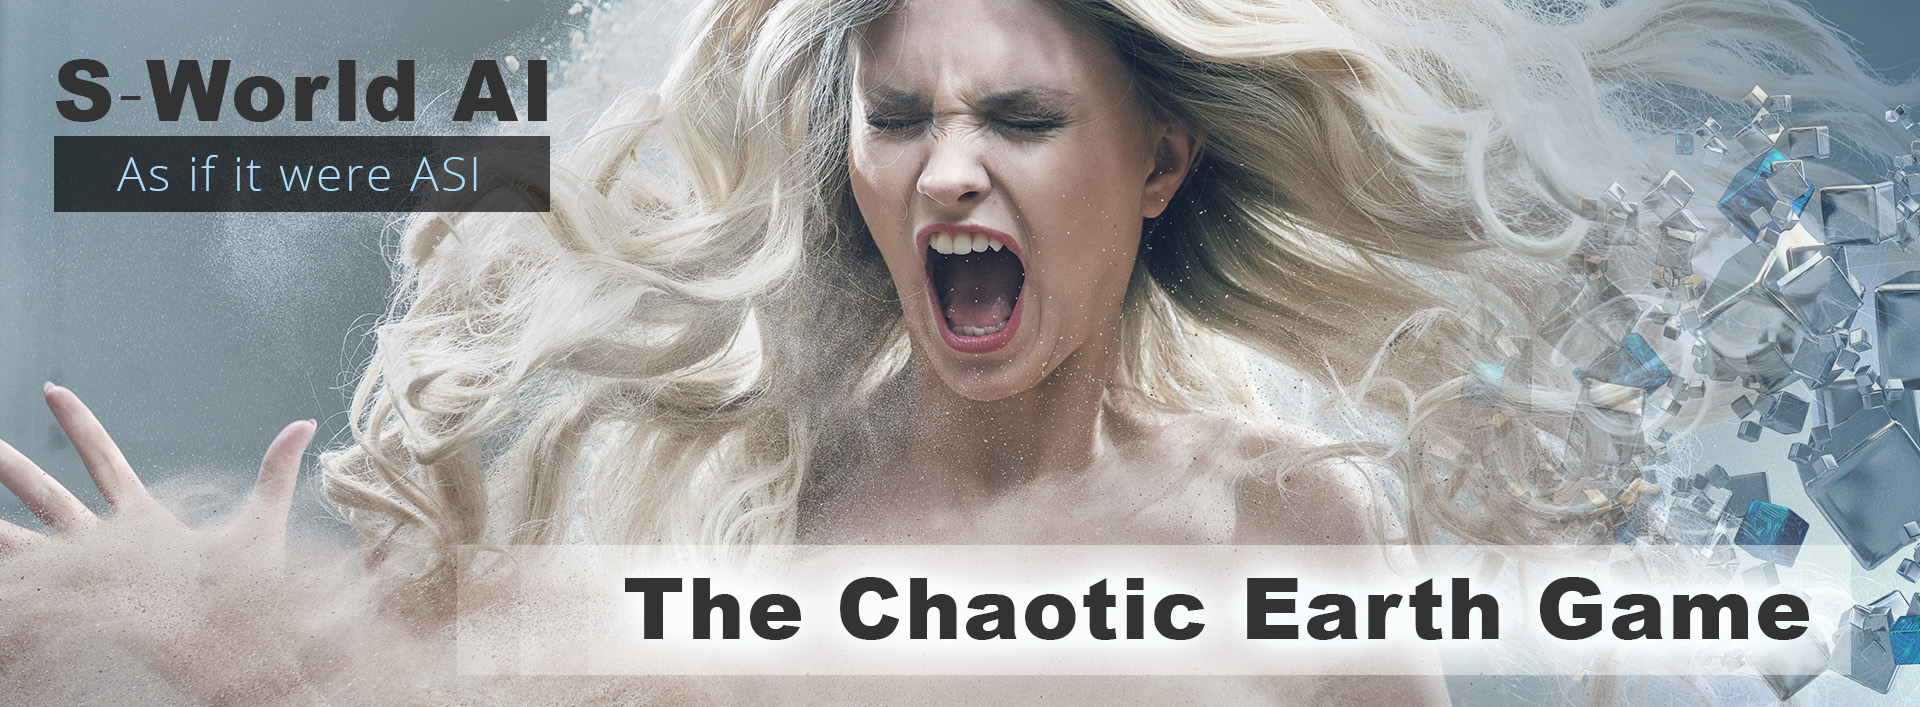 The Chaotic Earth Game